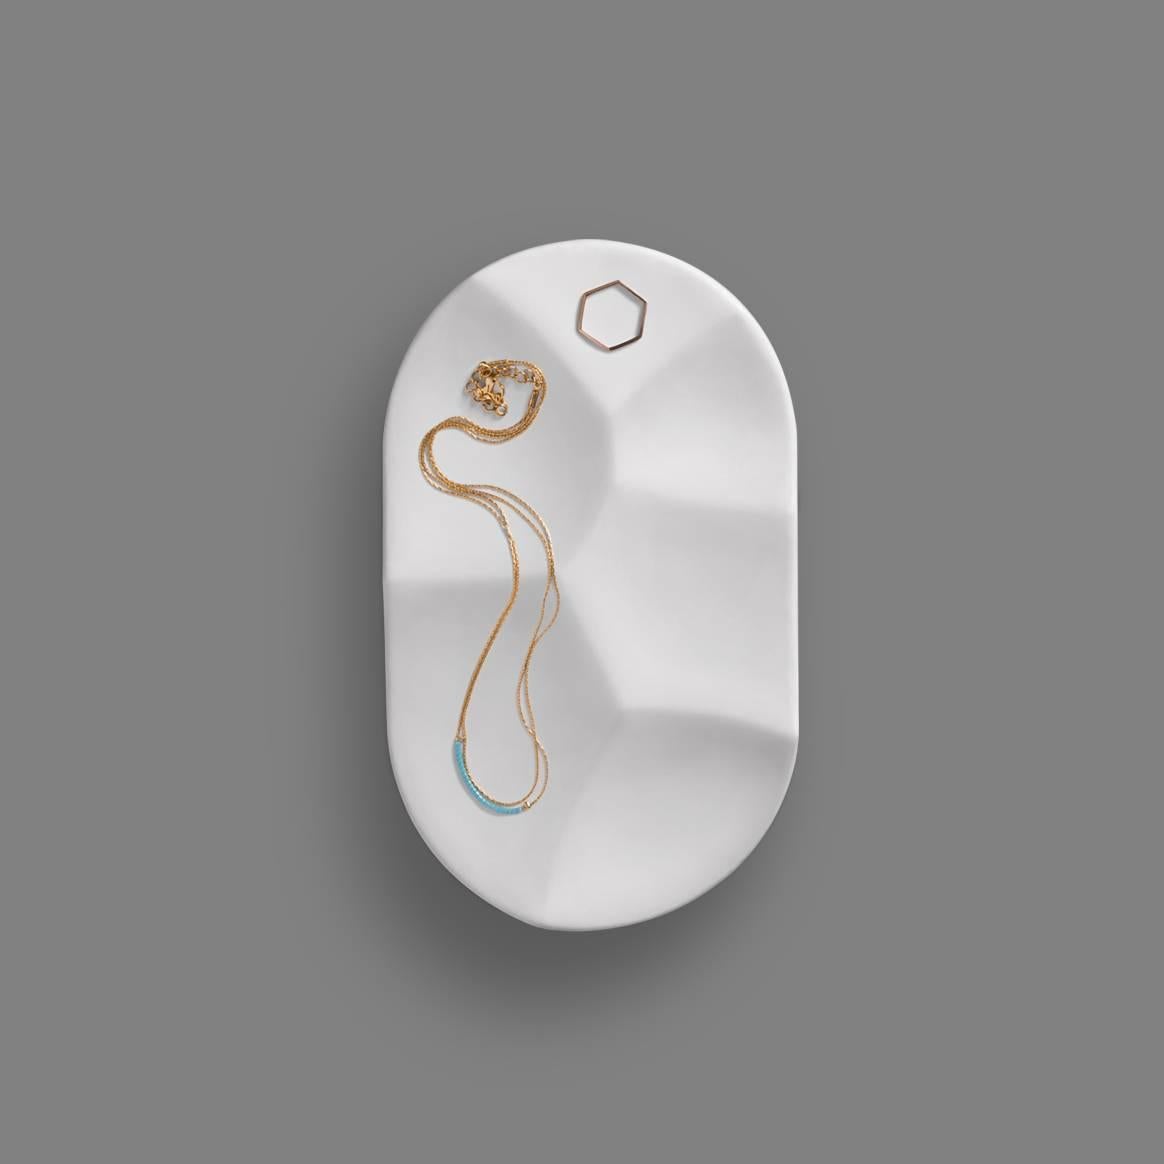 Inspired by the shapes created when yogurt is eaten with a spoon, the carved pill bowl incorporates an elegance and sophistication that will elevate any situation. Its partitions allow the user to easily compartmentalize their favorite belongings